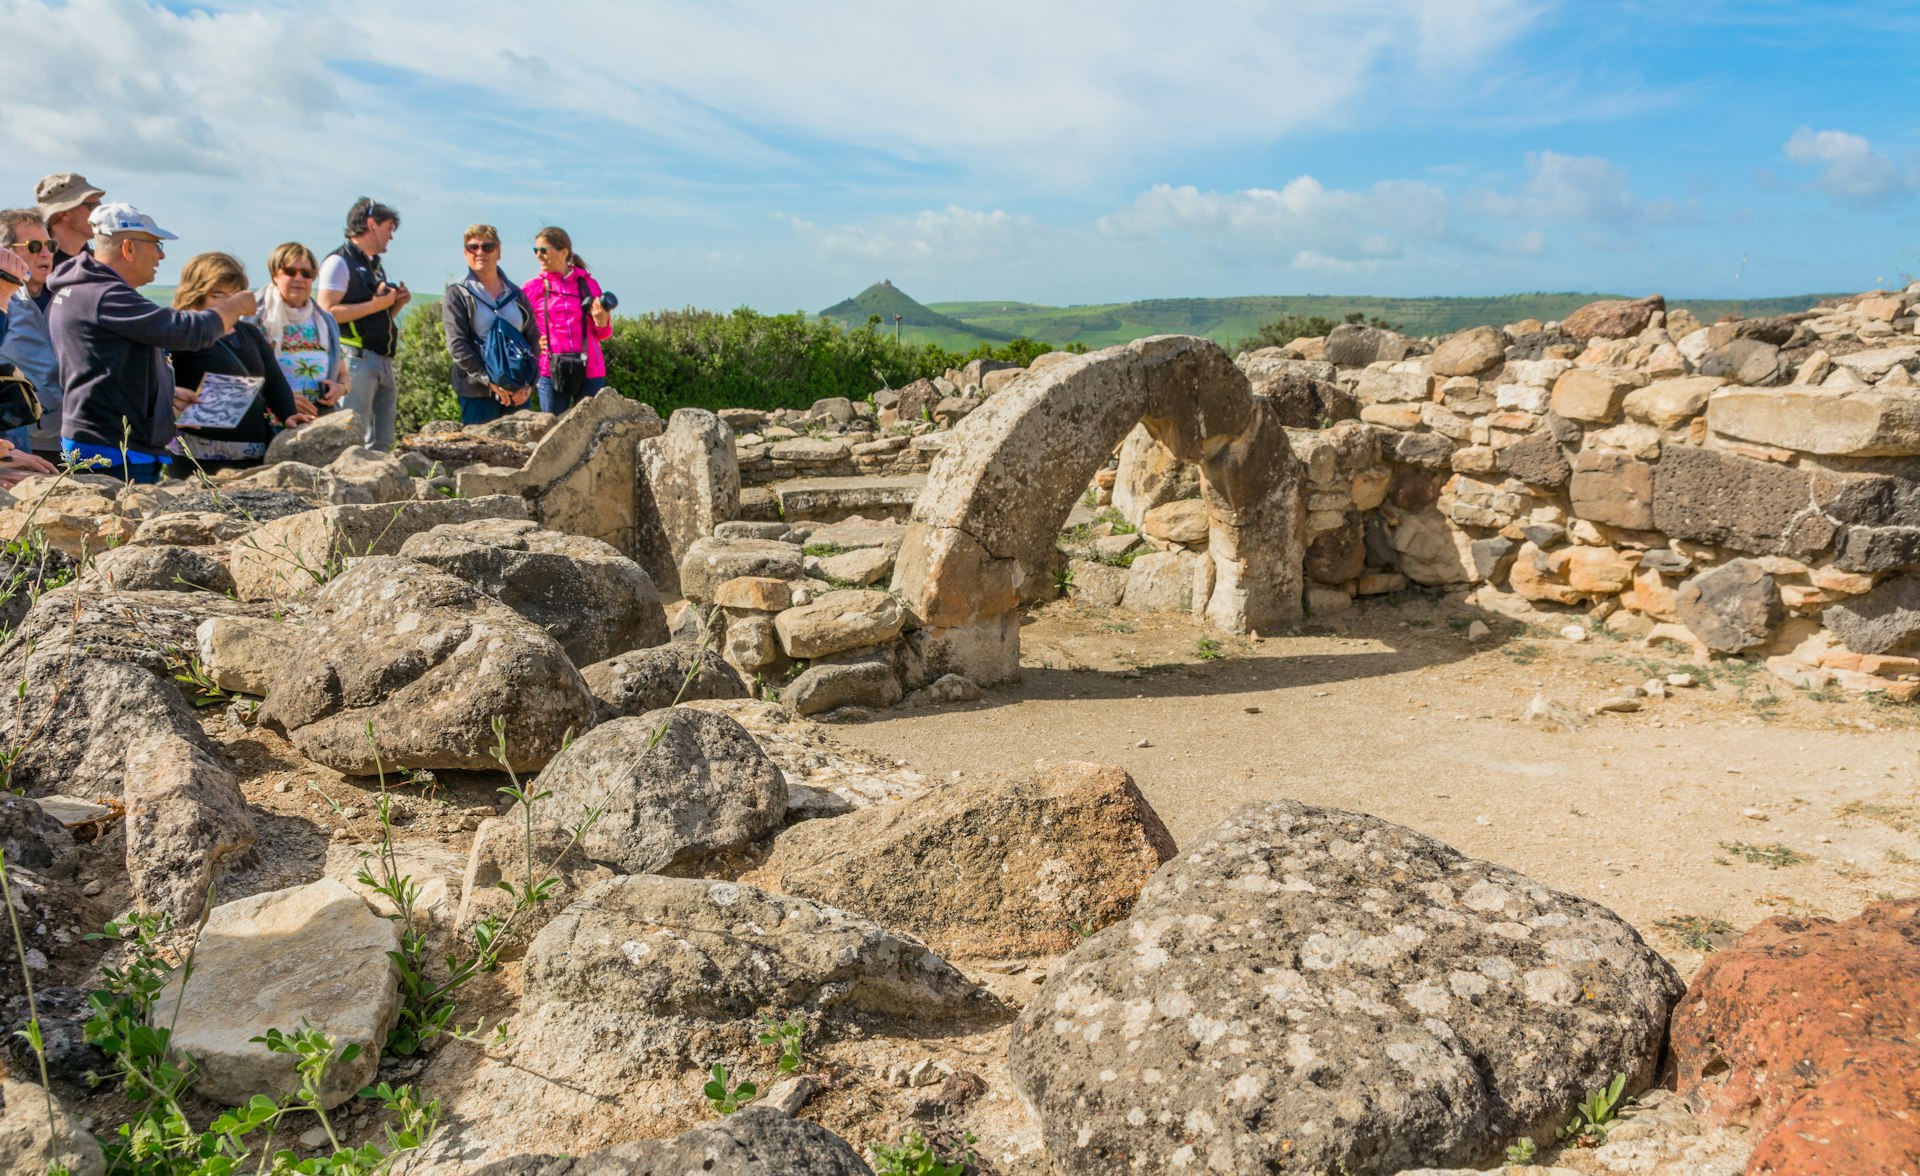 A group of visitors look over the stone structures built by an ancient civilization